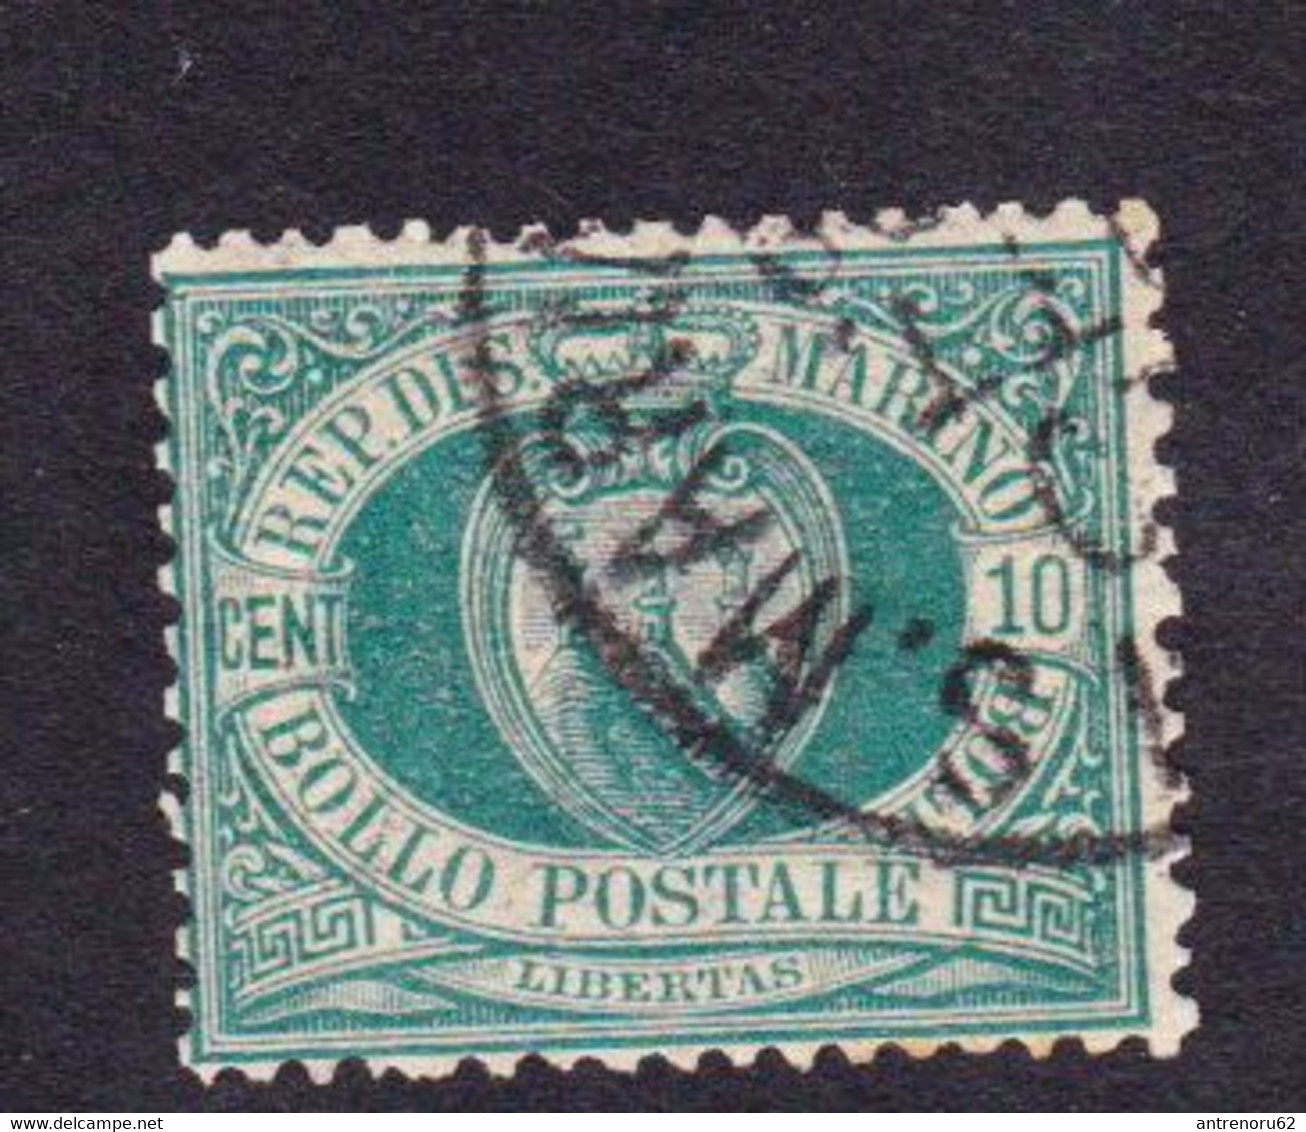 STAMPS-SAN-MARINO-1892-USED-SEE-SCAN - Used Stamps